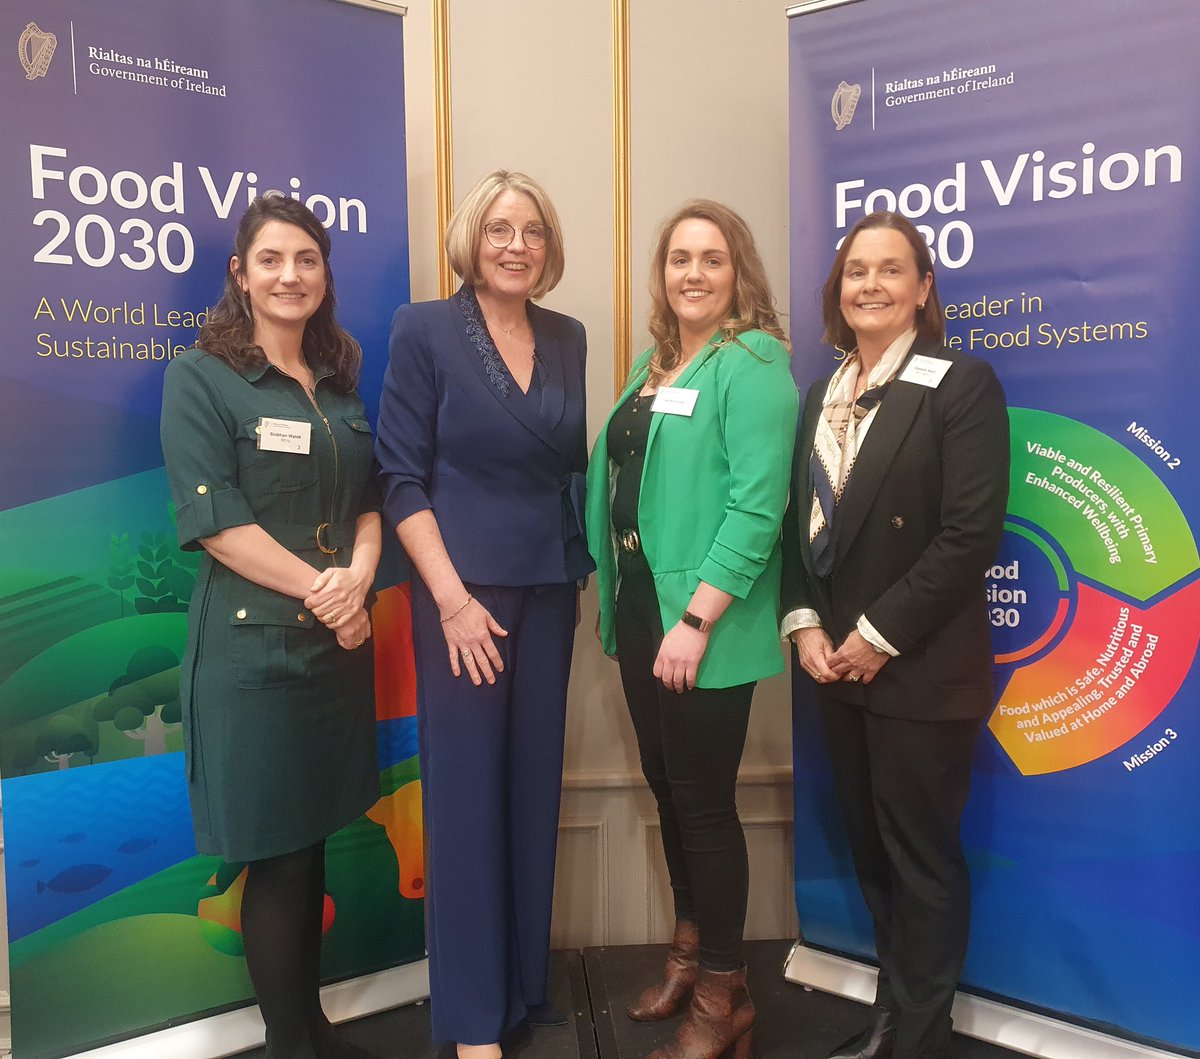 Delighted to attend the National Dialogue on Women in Ag and meet @marycoughlan & past @SETUAgriculture student @aoife_forde. Fantastic role model for future #womeninag